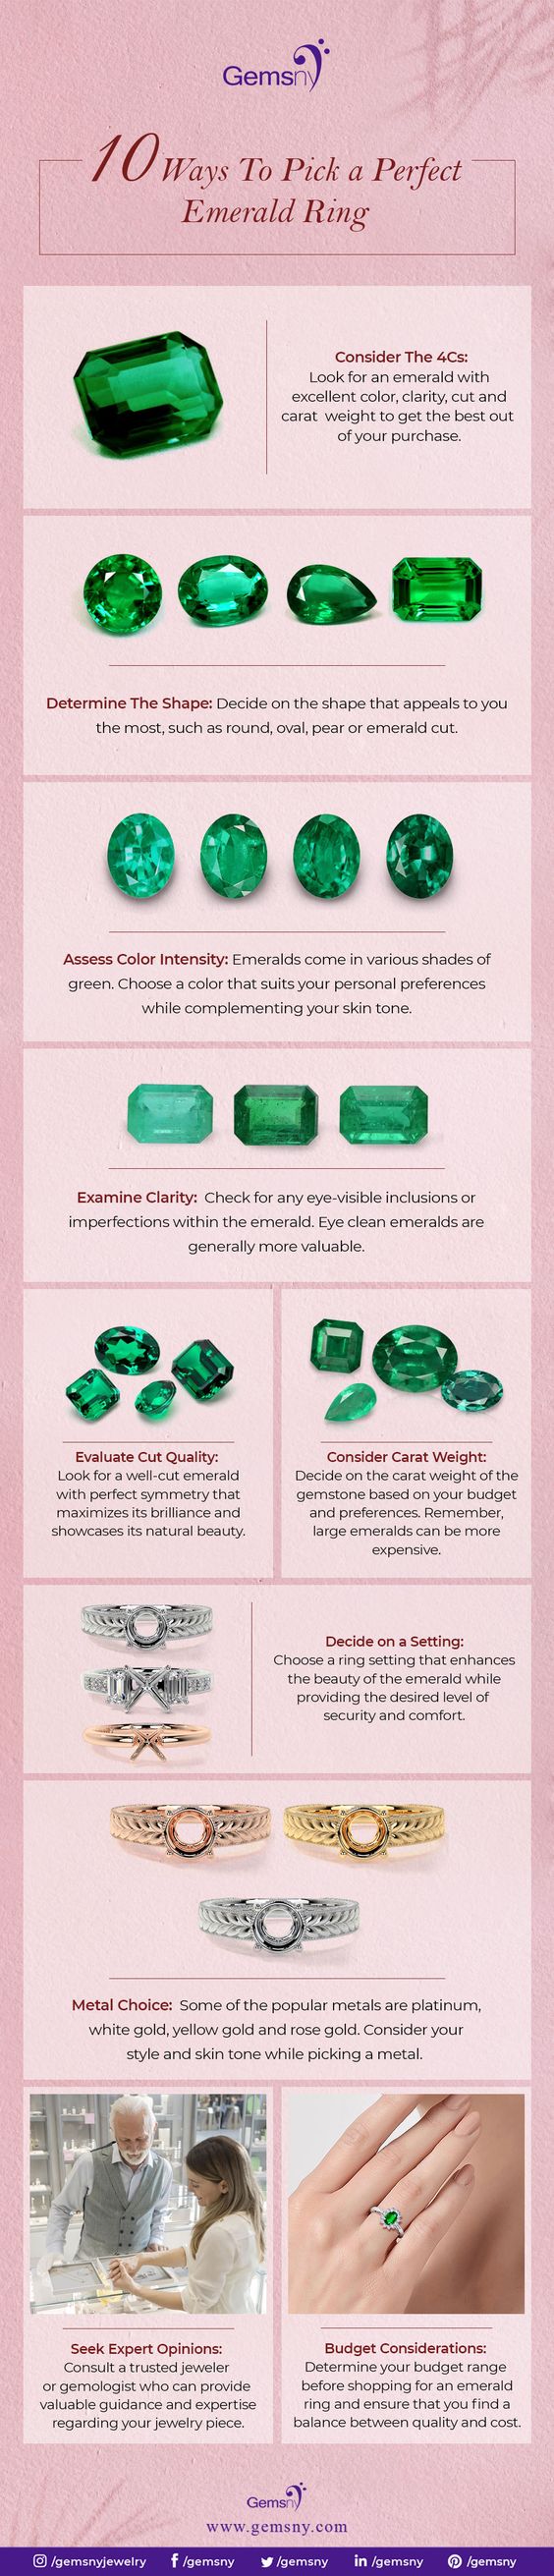 Bana

/ 0 Hays To Pick a Perfect
Emerald Ring

Consider The 4Cs:
Look for an emerald with
excellent color, cla and
CAMA WIGHT 10 GEt the best out

purchase

$oet

Determine The Shape: Decide on the shape that appeals 10 you

 

 

the most, such as round, oval, pear or emerakd cut

Assess Color Intensity: Emeralds come in va

 

ss shades of
that suits your personal preferences
while complementing your skin tone

green Choose a cok

 

 

Examine Clarity: Check ‘or any eye-visible

mpertections within the emerakd. Eye clean emeralds are

   

generally more valuable

Fe 0%

Evaluate Cut Quality:
Look for a wall-cut emerald
with perfect symmetry that

Consider Carat Weight
Decca on the carat wight of the

 

maxmizes its brlance and
Showcases cal bs

  
 

auty

  

Decide on a Setting:
Choose ing 3

  
  

nhances
eras whie
evi of

y and comfort

  

 

Metal Choice: Some of the popular metals are clatinum,

white gold, yellow Gokd and rose gc

 

Conssder your
stybe and skin tone wh

  

1g a meta

 

Seek Expert Opinions:

Budget Considerations:
Consuk a trusted jeweler

Determine your budge: ange

 

an prov
pert
o jewelry pace